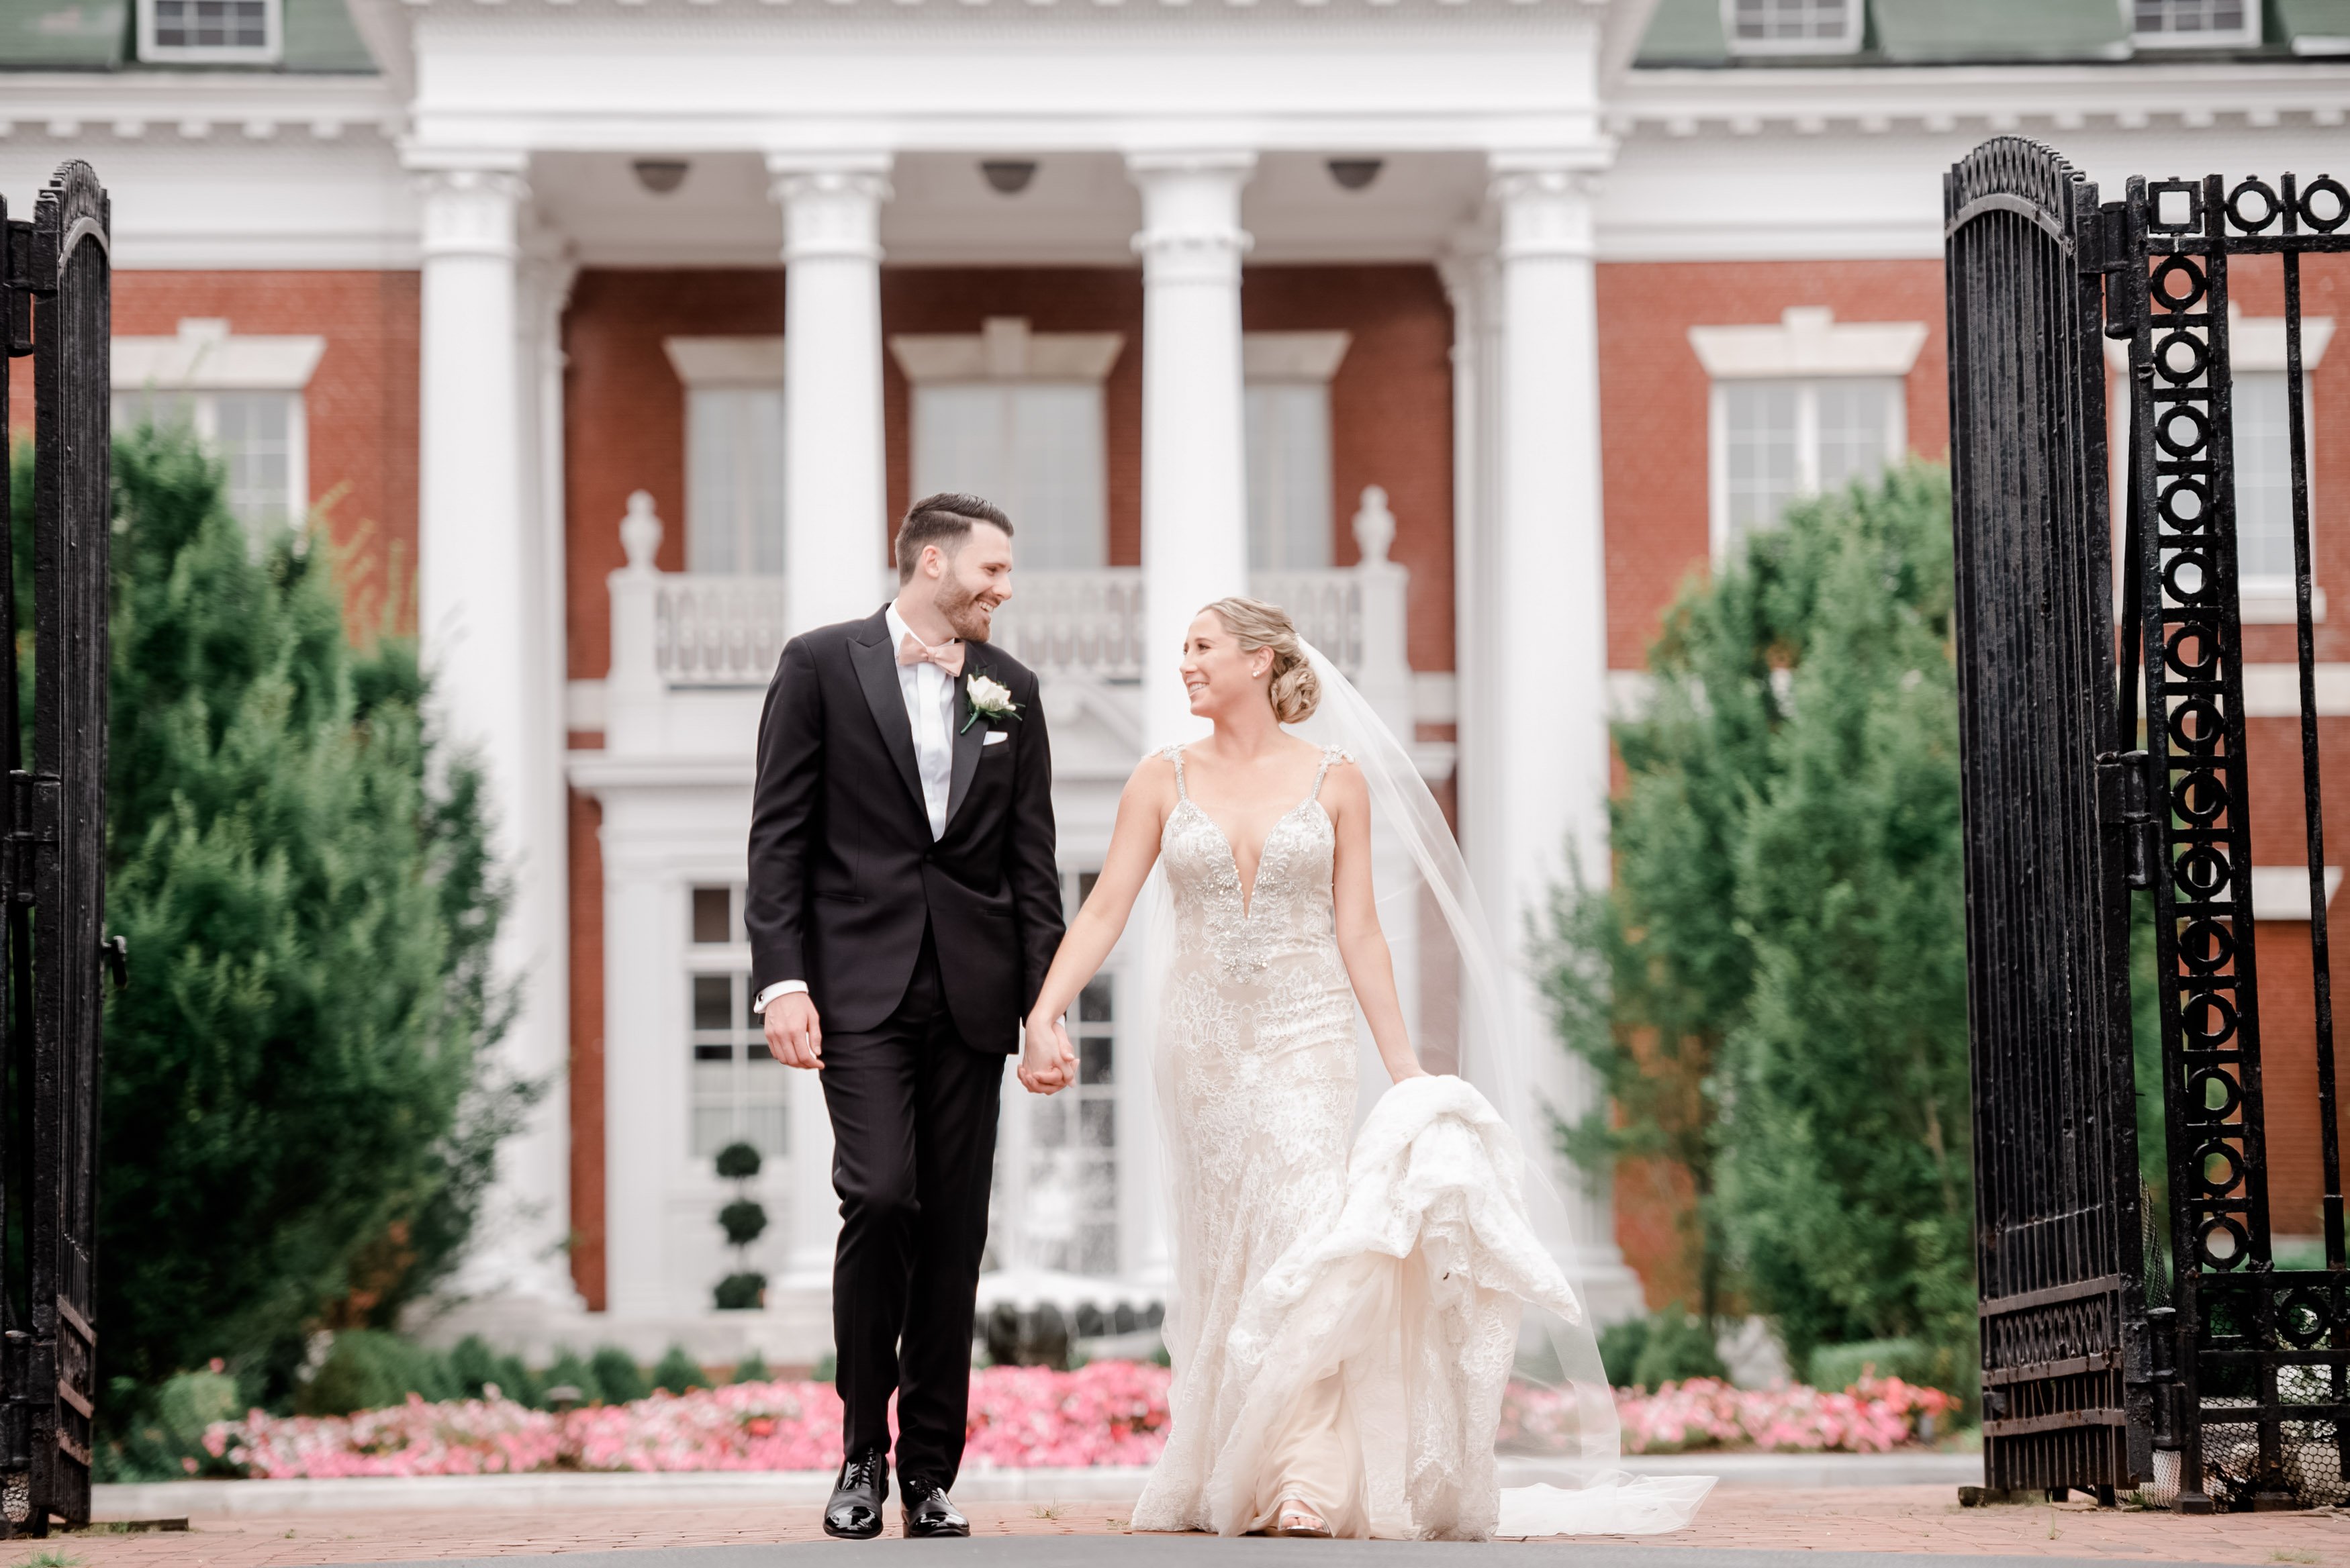 Bourne Mansion - Light and Airy Wedding Photos